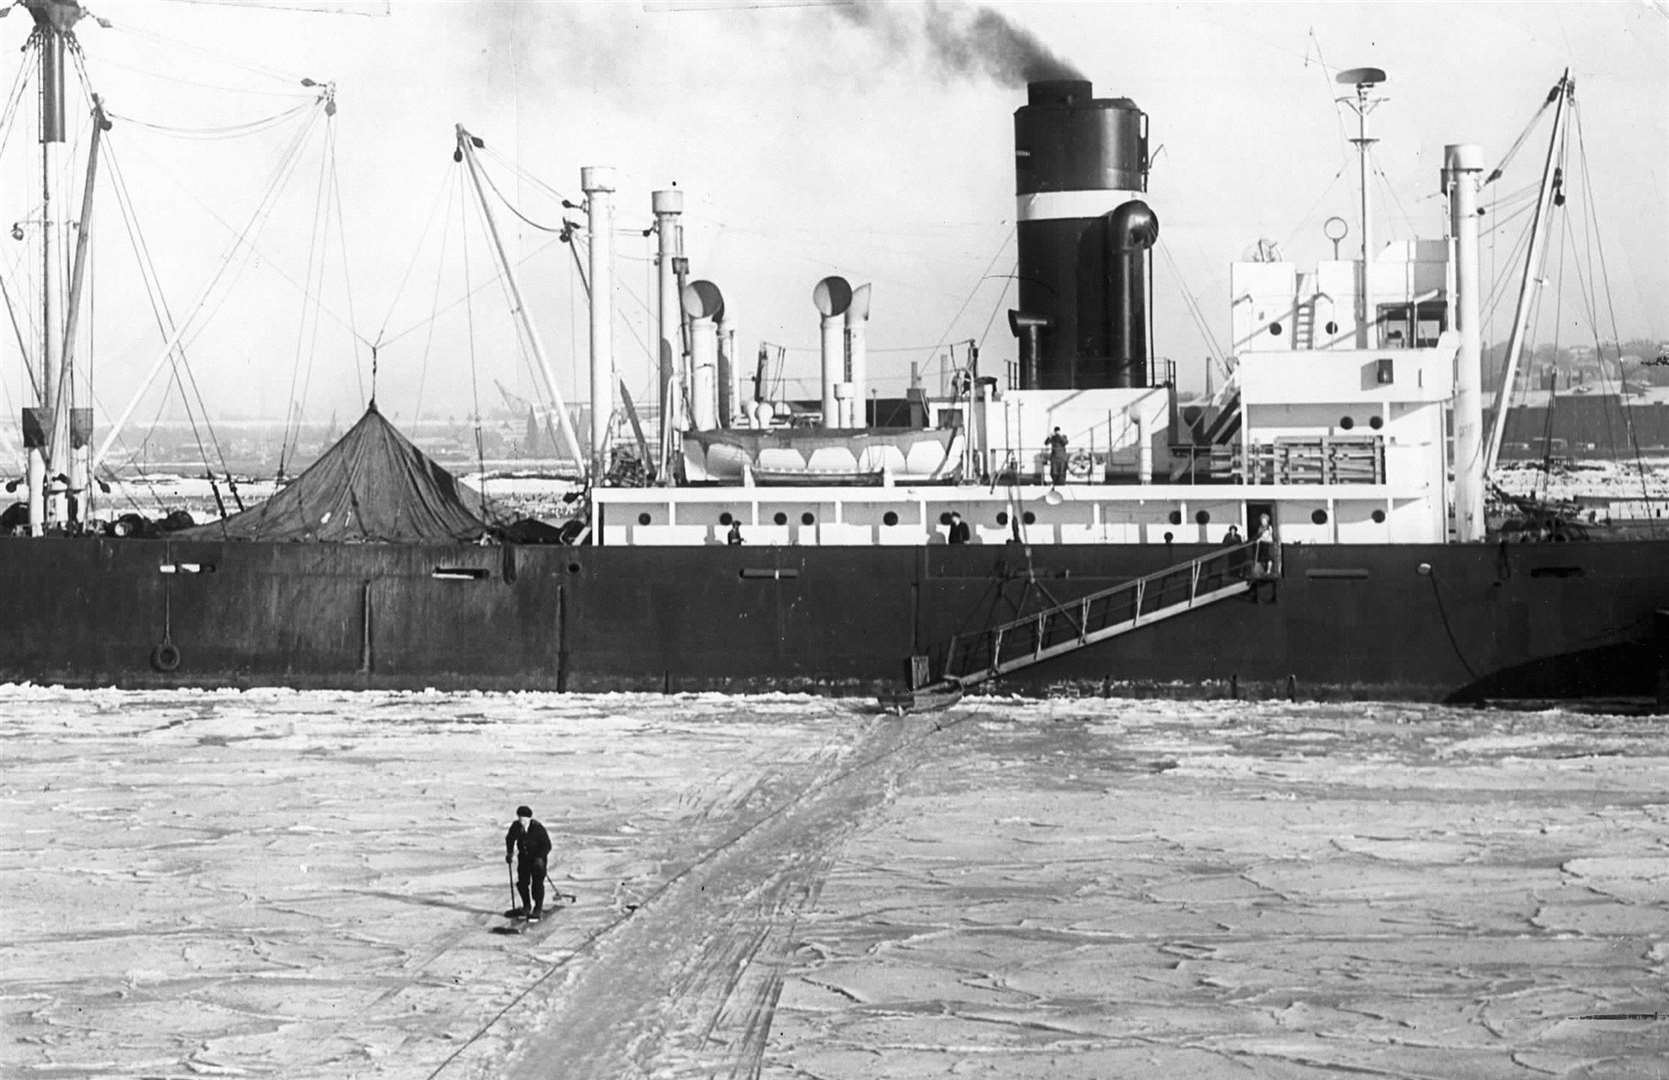 A seaman skies across the frozen River Medway at Rochester from his ship to visit the shops on January 25, 1963, after his boat was trapped in ice